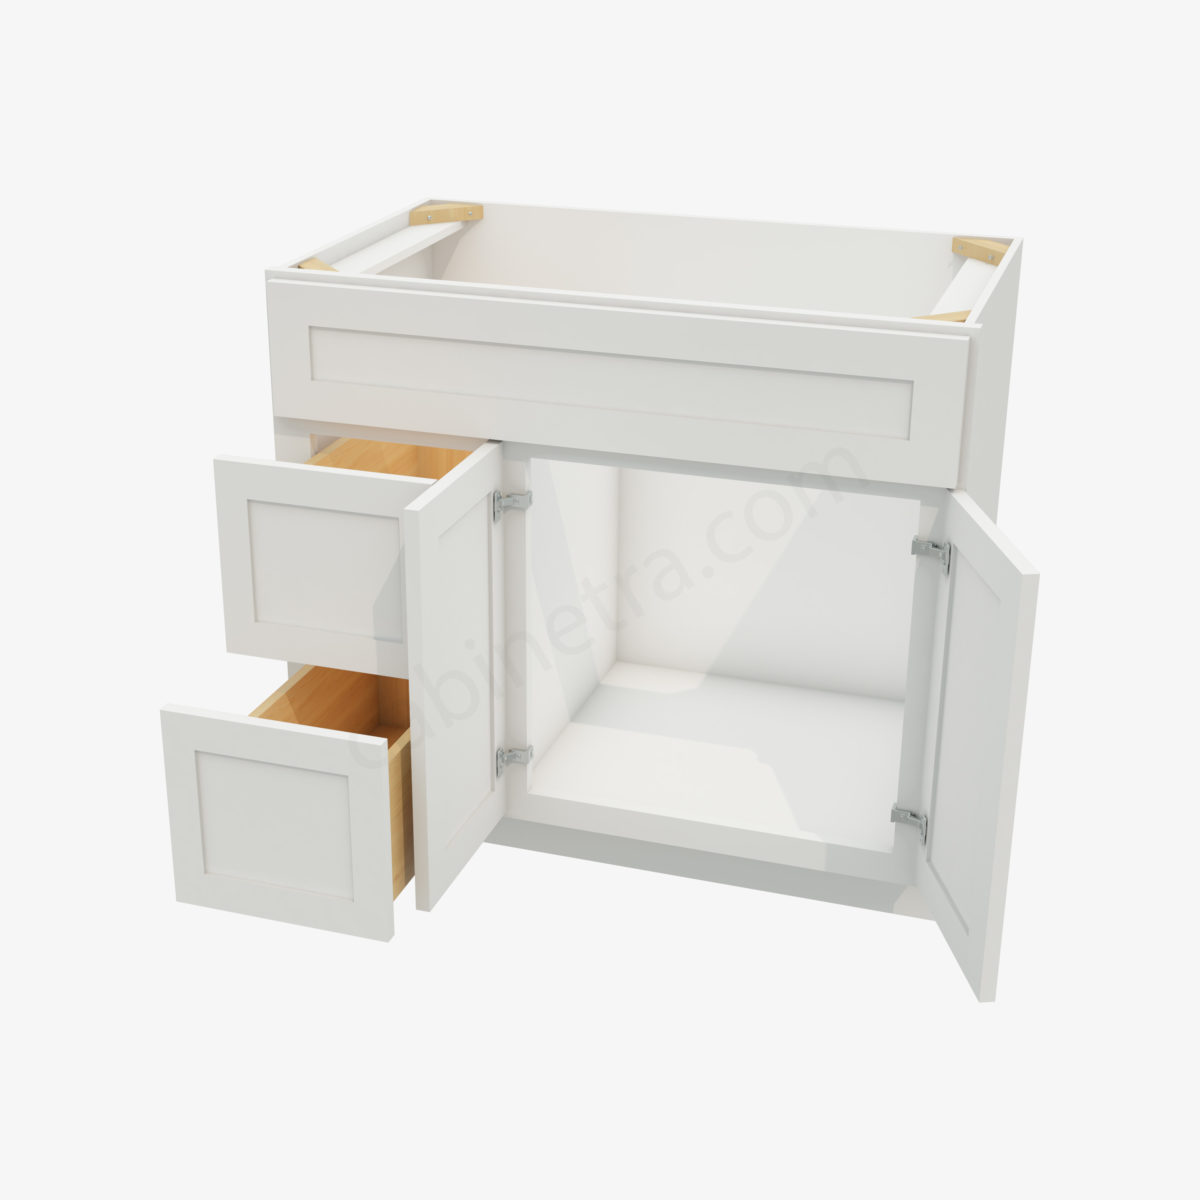 AW S3621BDL 34 5 Forevermark Ice White Shaker Cabinetra scaled